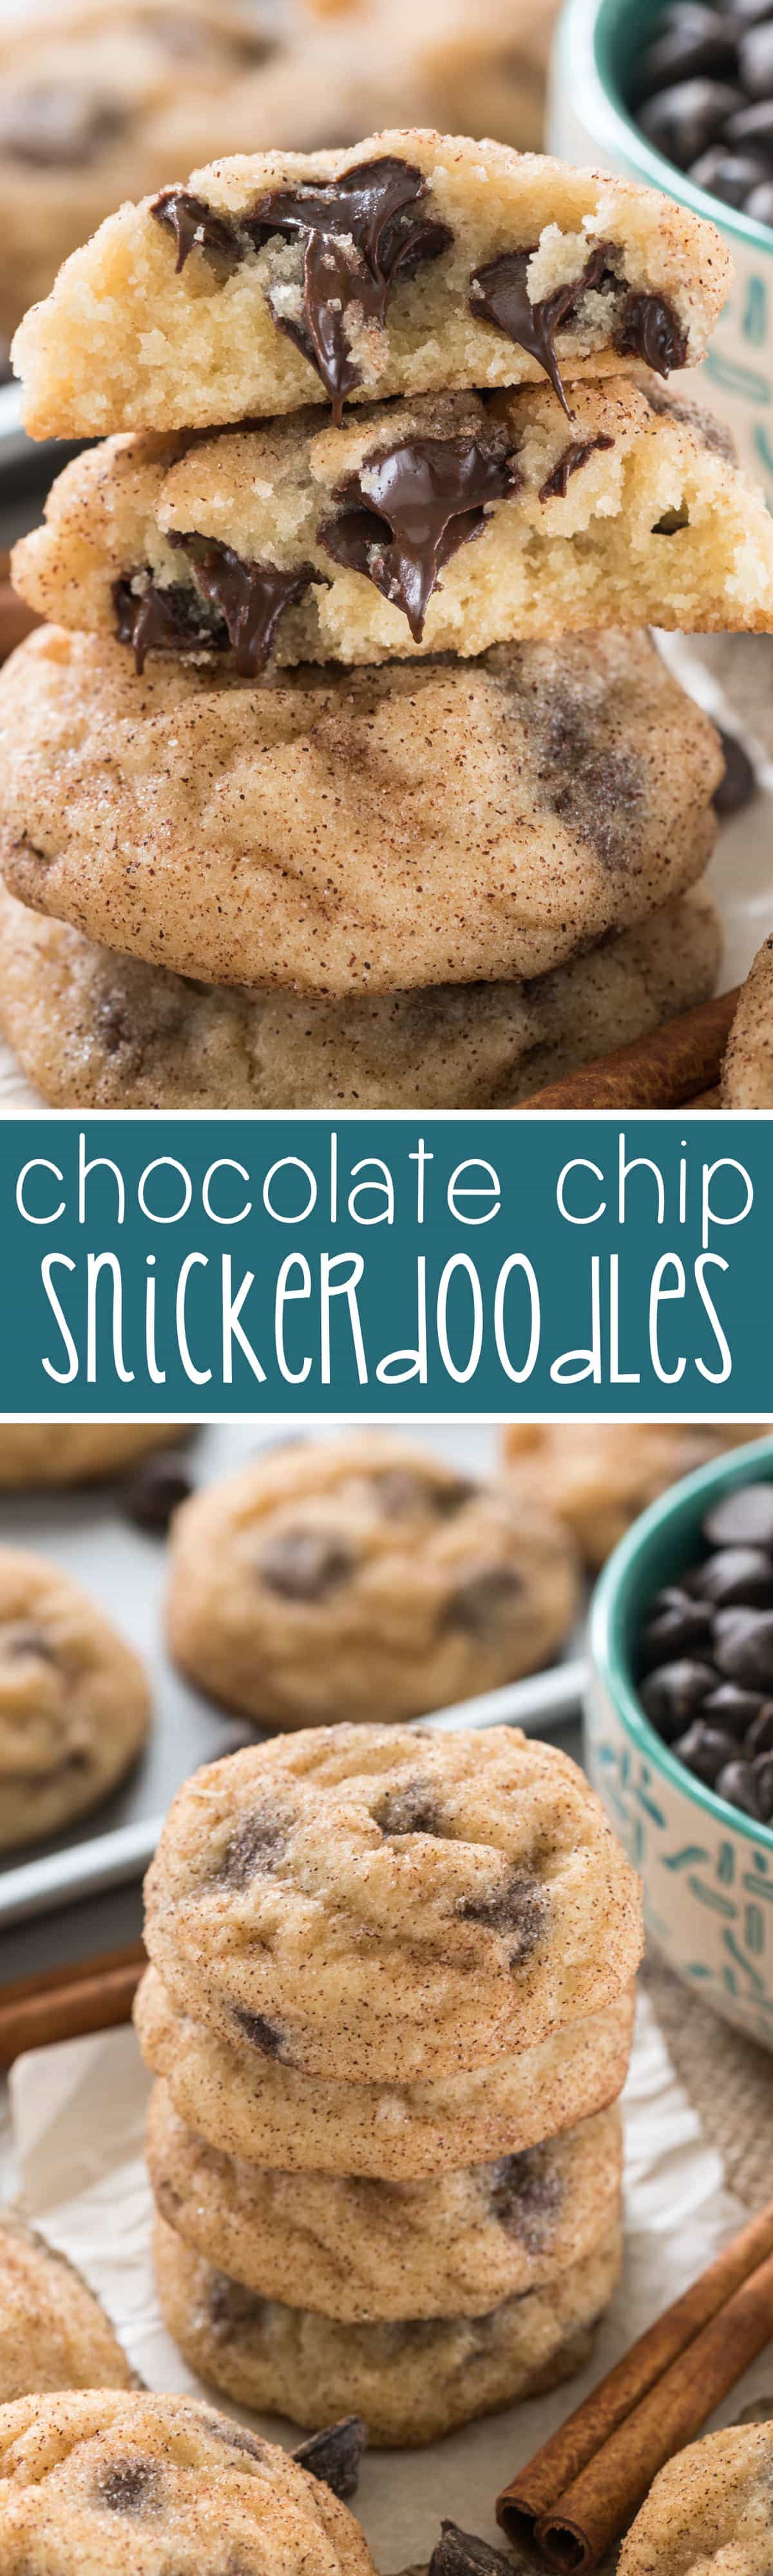 Chocolate Chip Snickerdoodles - this easy snickerdoodle recipe is FILLED with chocolate chips. We made these twice in two days! Chocolate goes so well with snickerdoodle cookies!